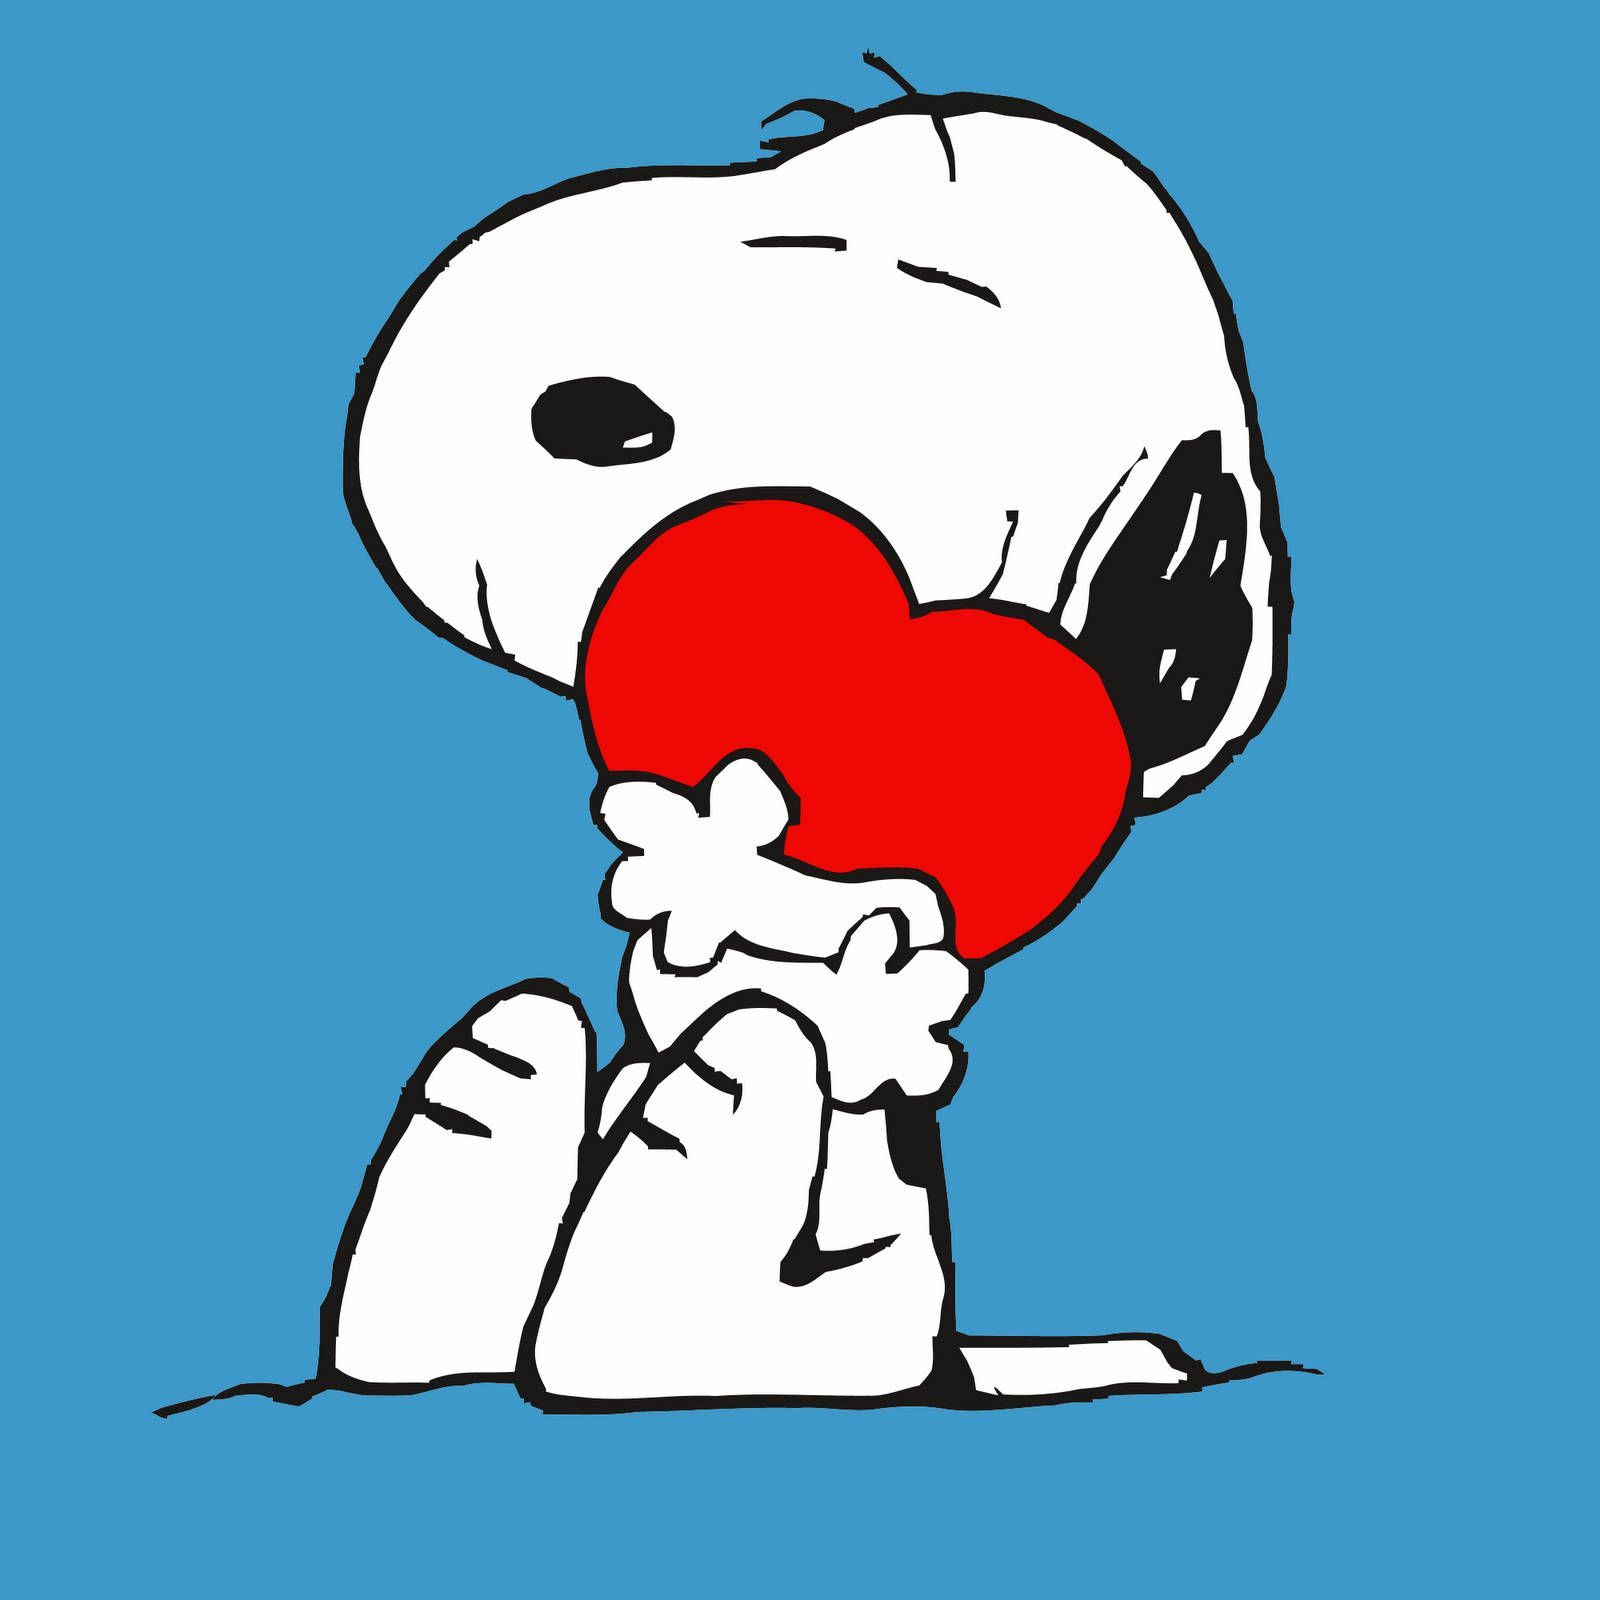 Snoopy hugging a heart. - Snoopy